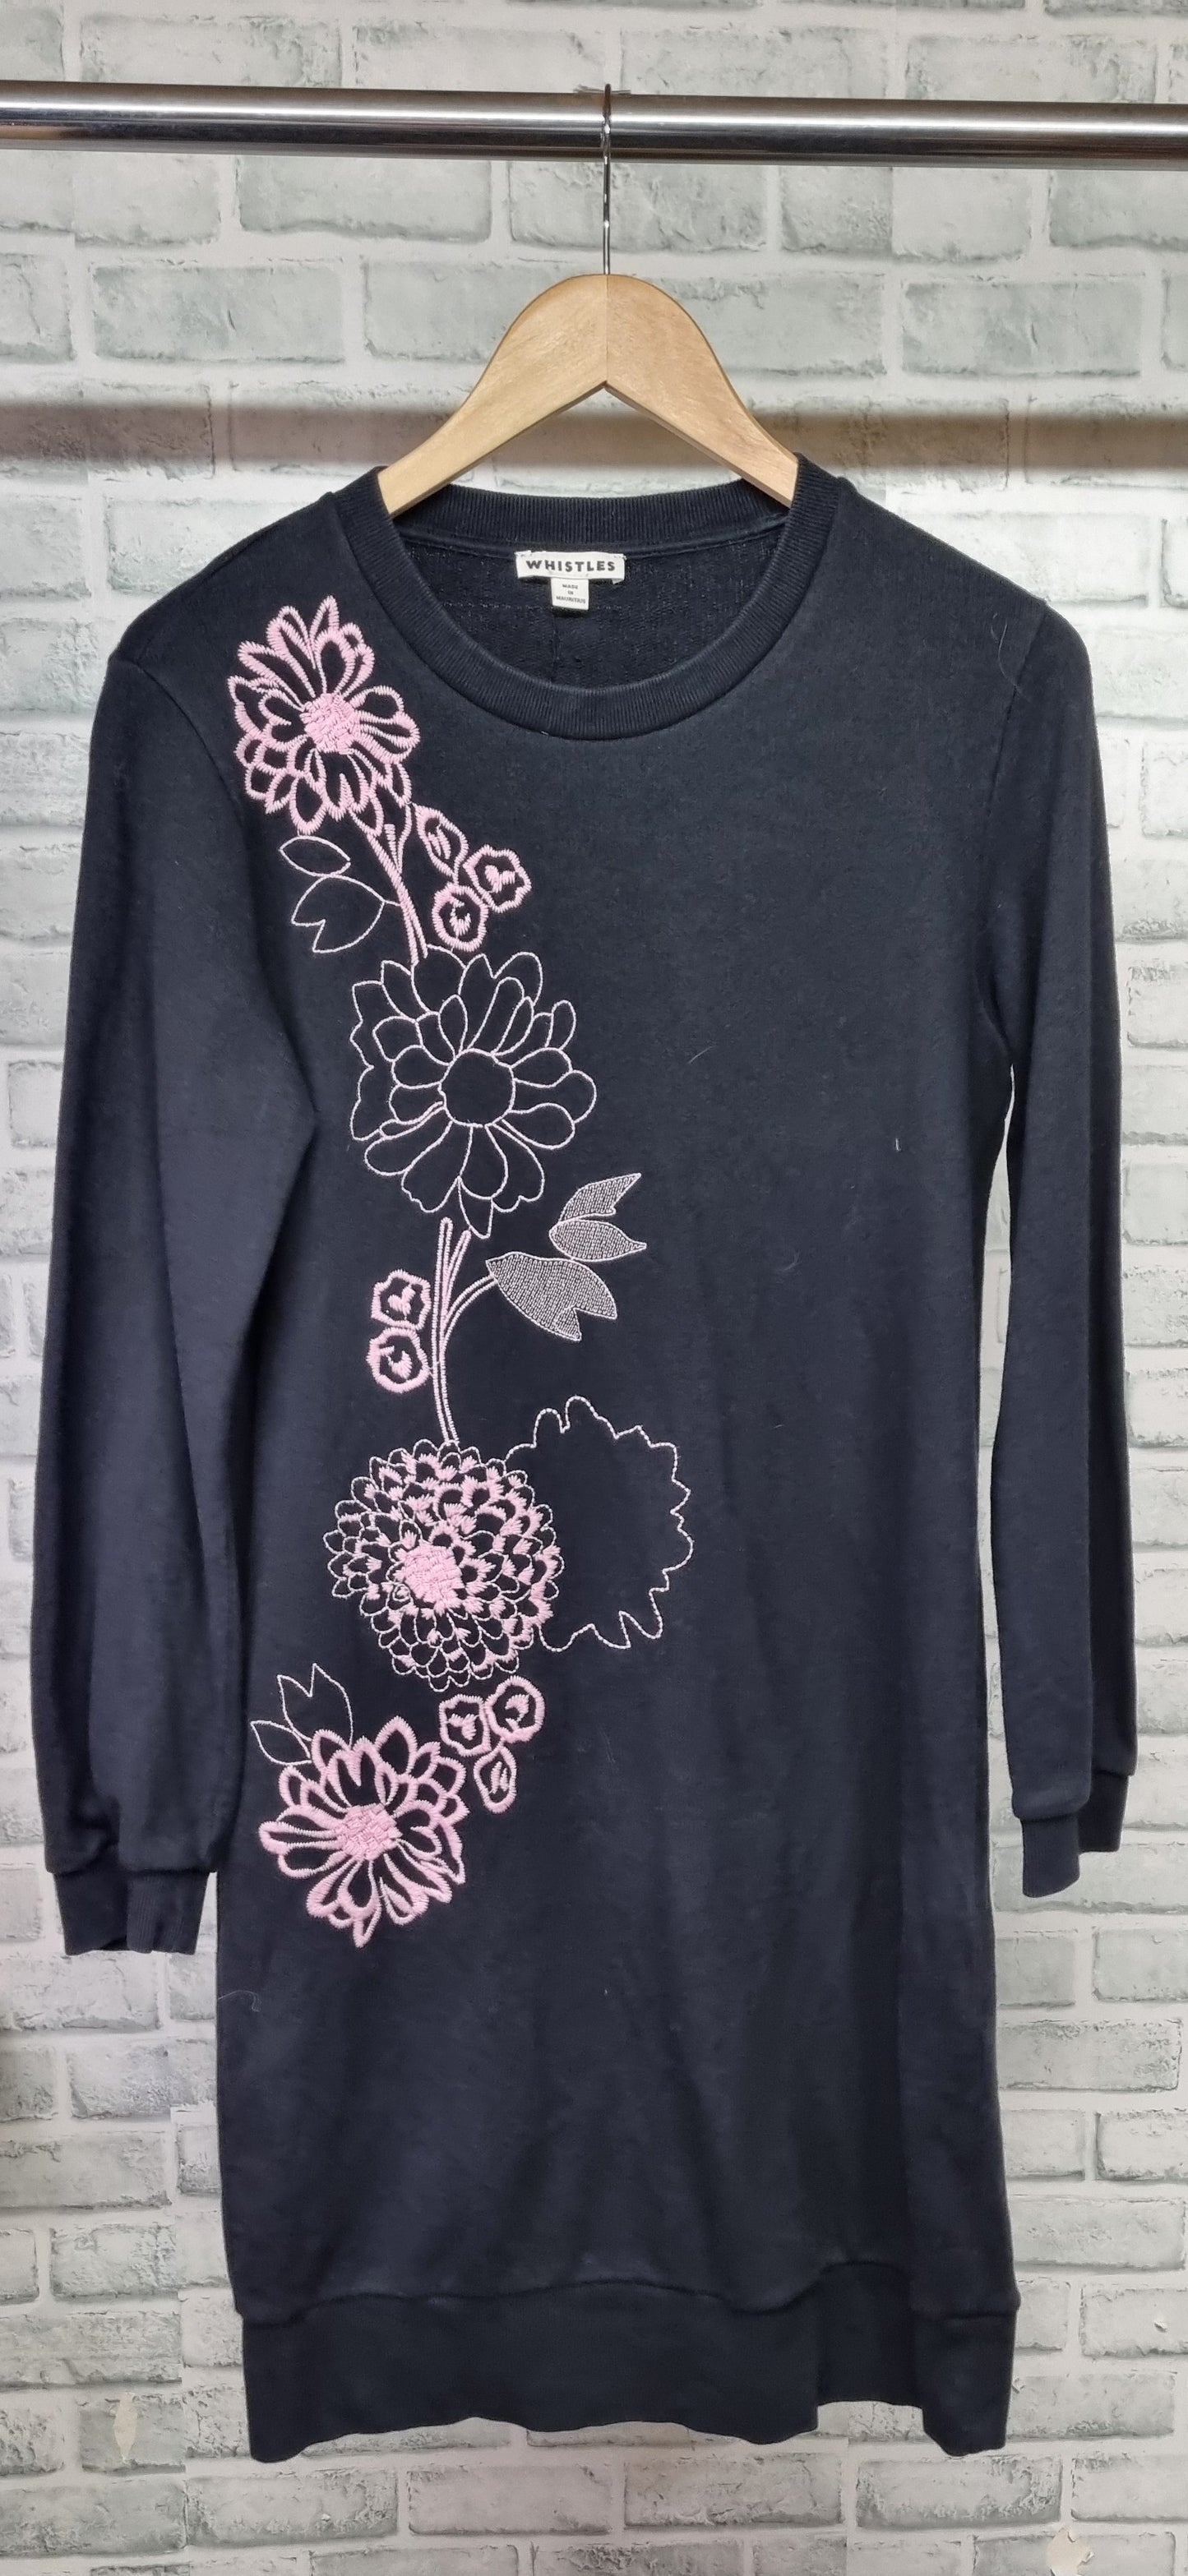 Whistles Black Cotton Sweatshirt Pink Flower Embroidery Dress Size Small